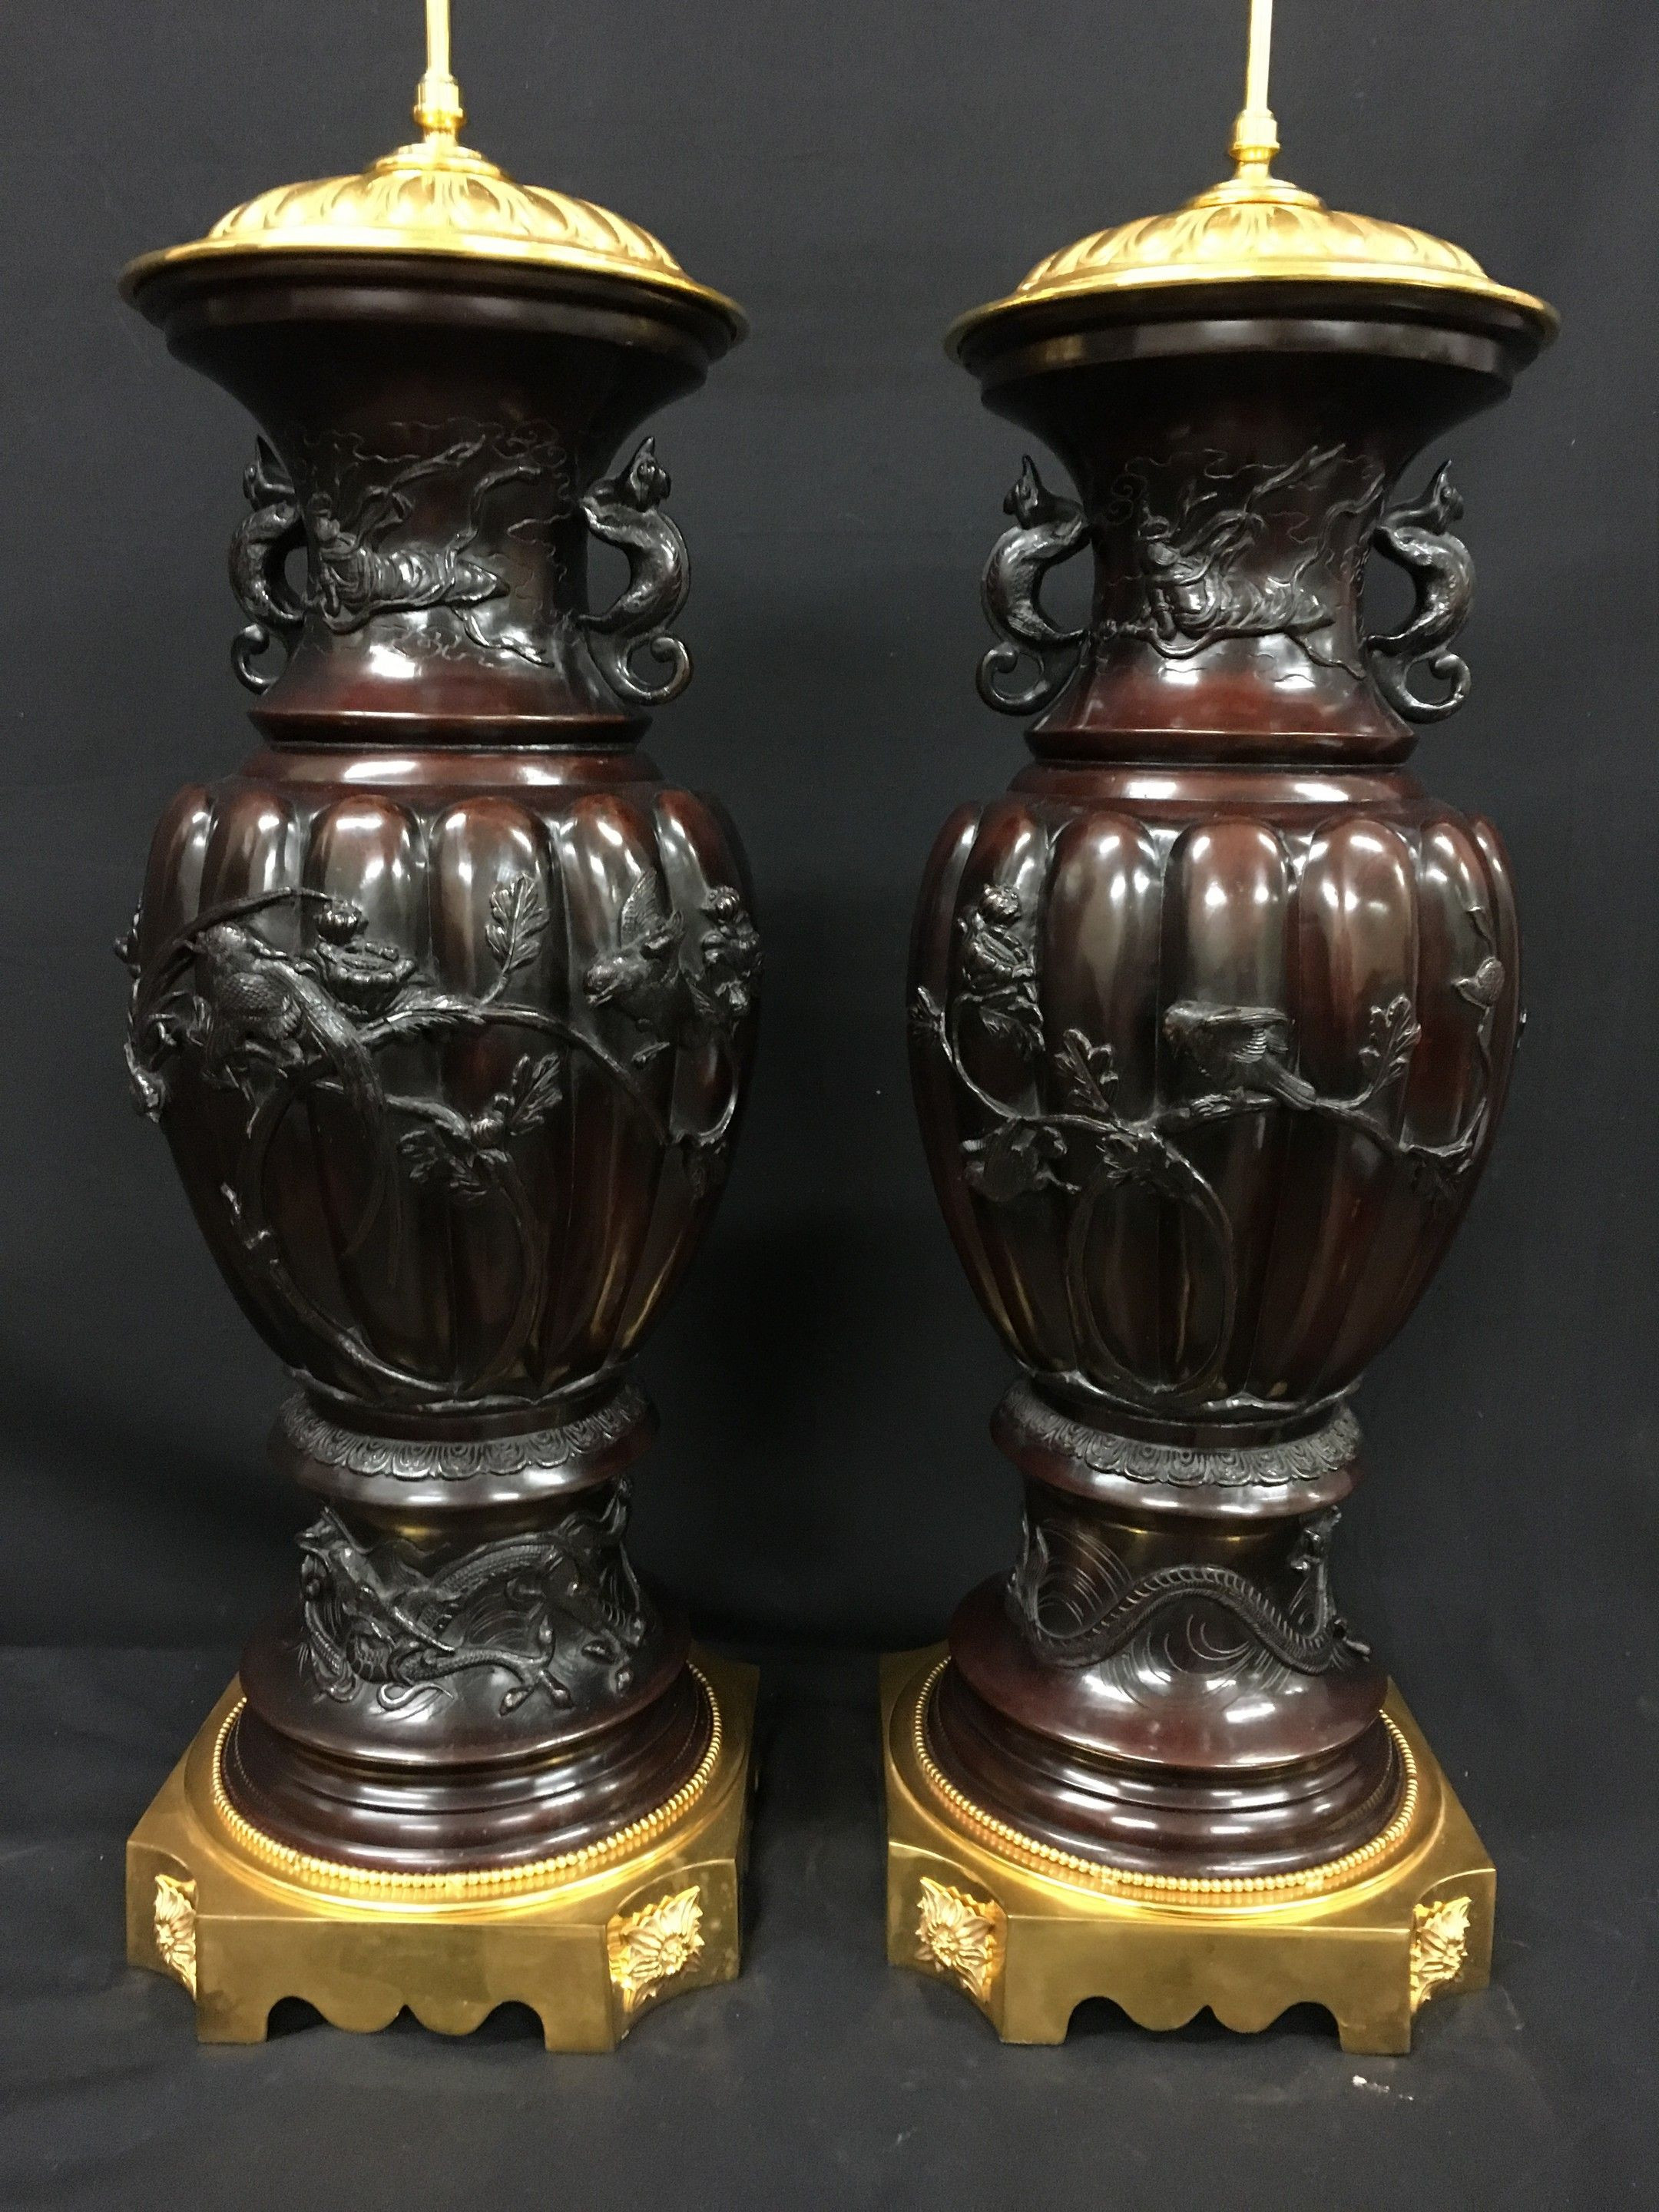 26 Cute Chinese Vase Lamp Base 2024 free download chinese vase lamp base of antique japanese vases the uks premier antiques portal online for pair large japanese bronze vases lamps